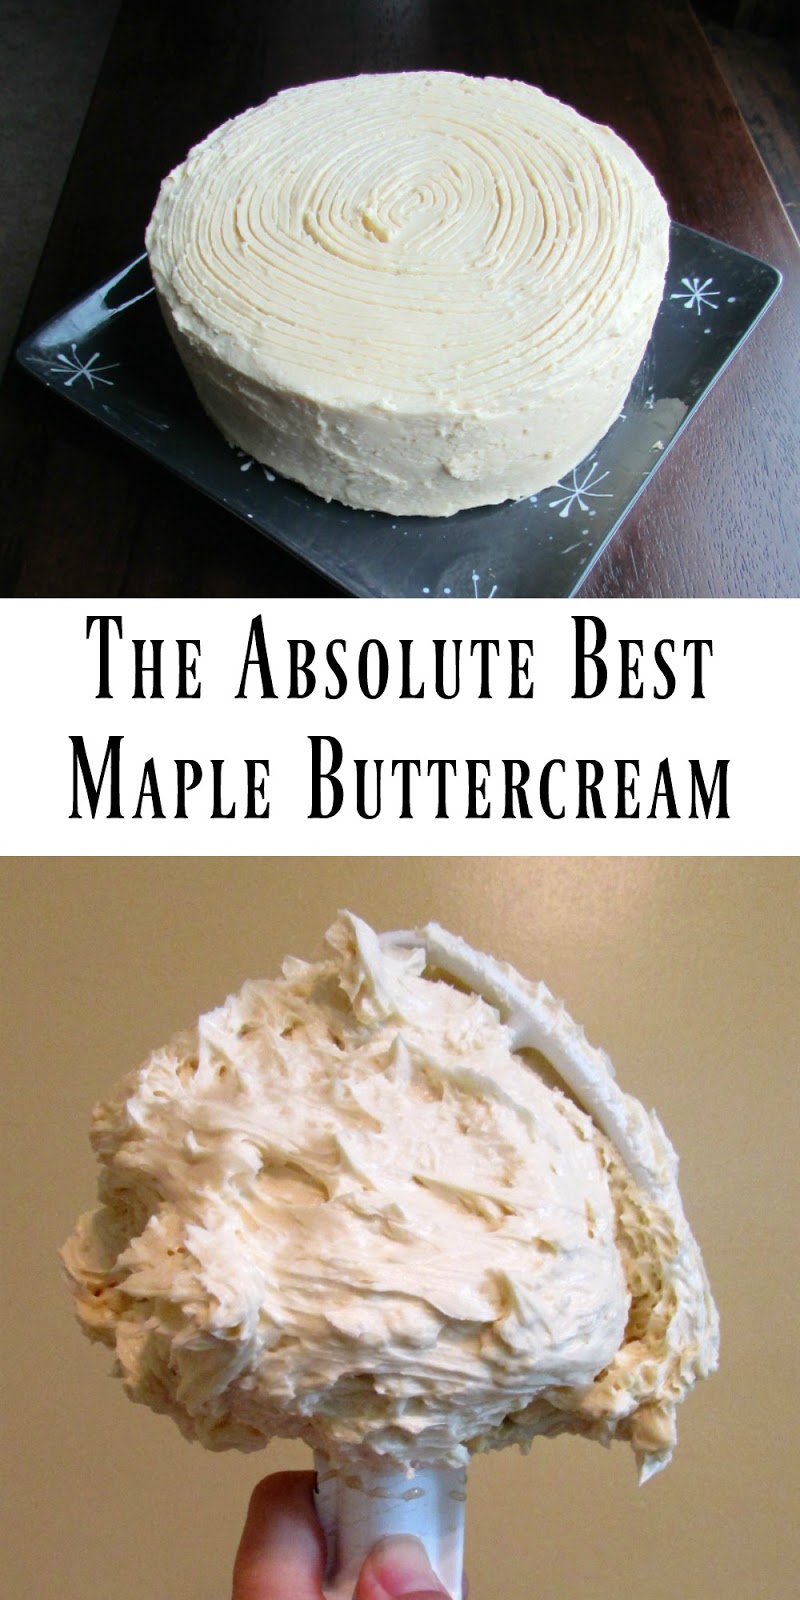 This Maple Buttercream is the best ever! It's not too sweet and has just enough maple. It is cream, smooth and buttery in the best kind of way. You have to try it!